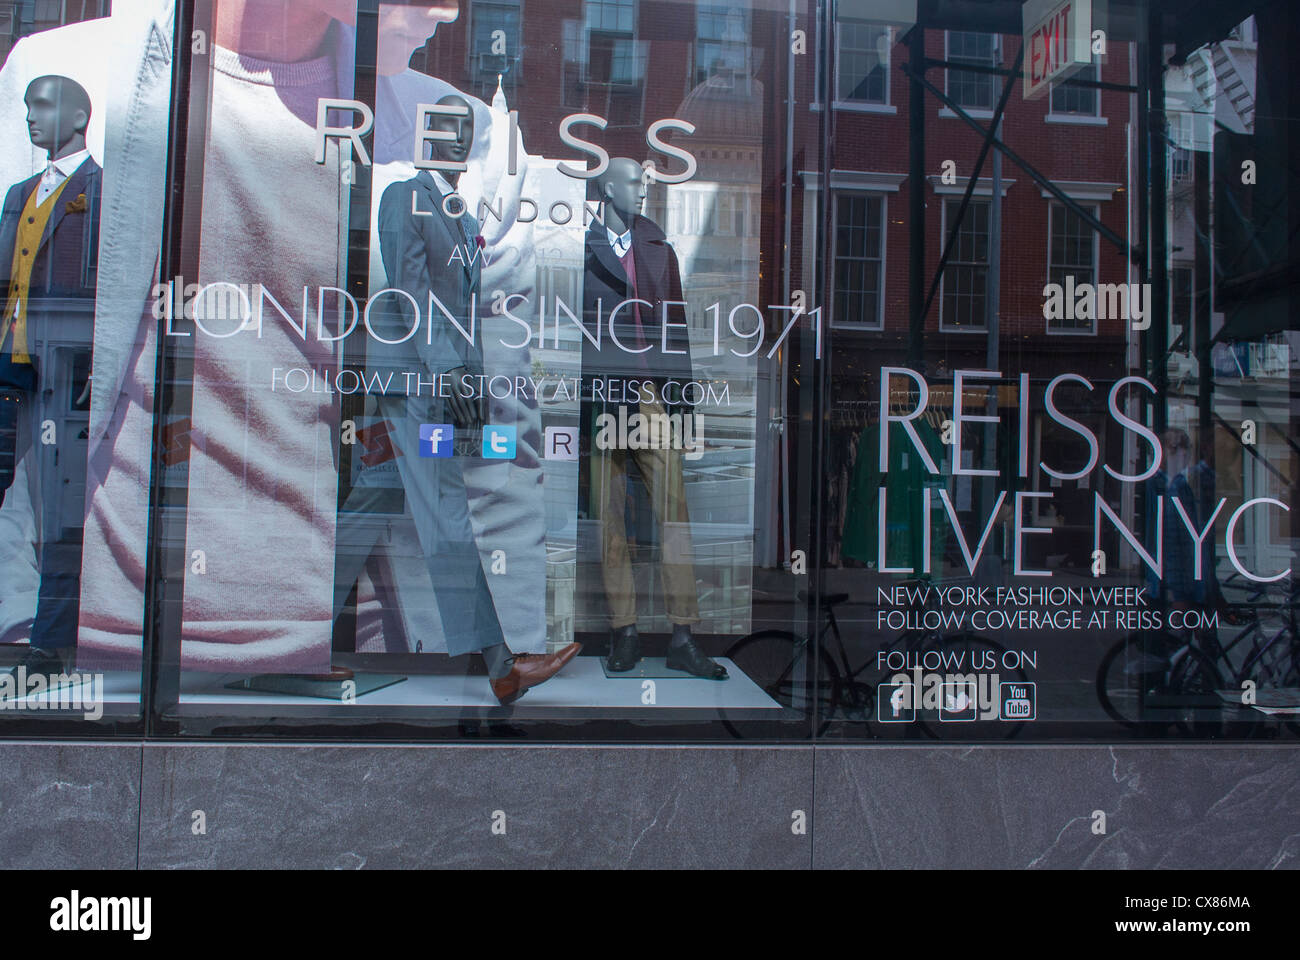 New York City, NY, USA, Fashion Stores, Reiss Shop, Shopping in Greenwich Village, Store Front Window, Sign Stock Photo